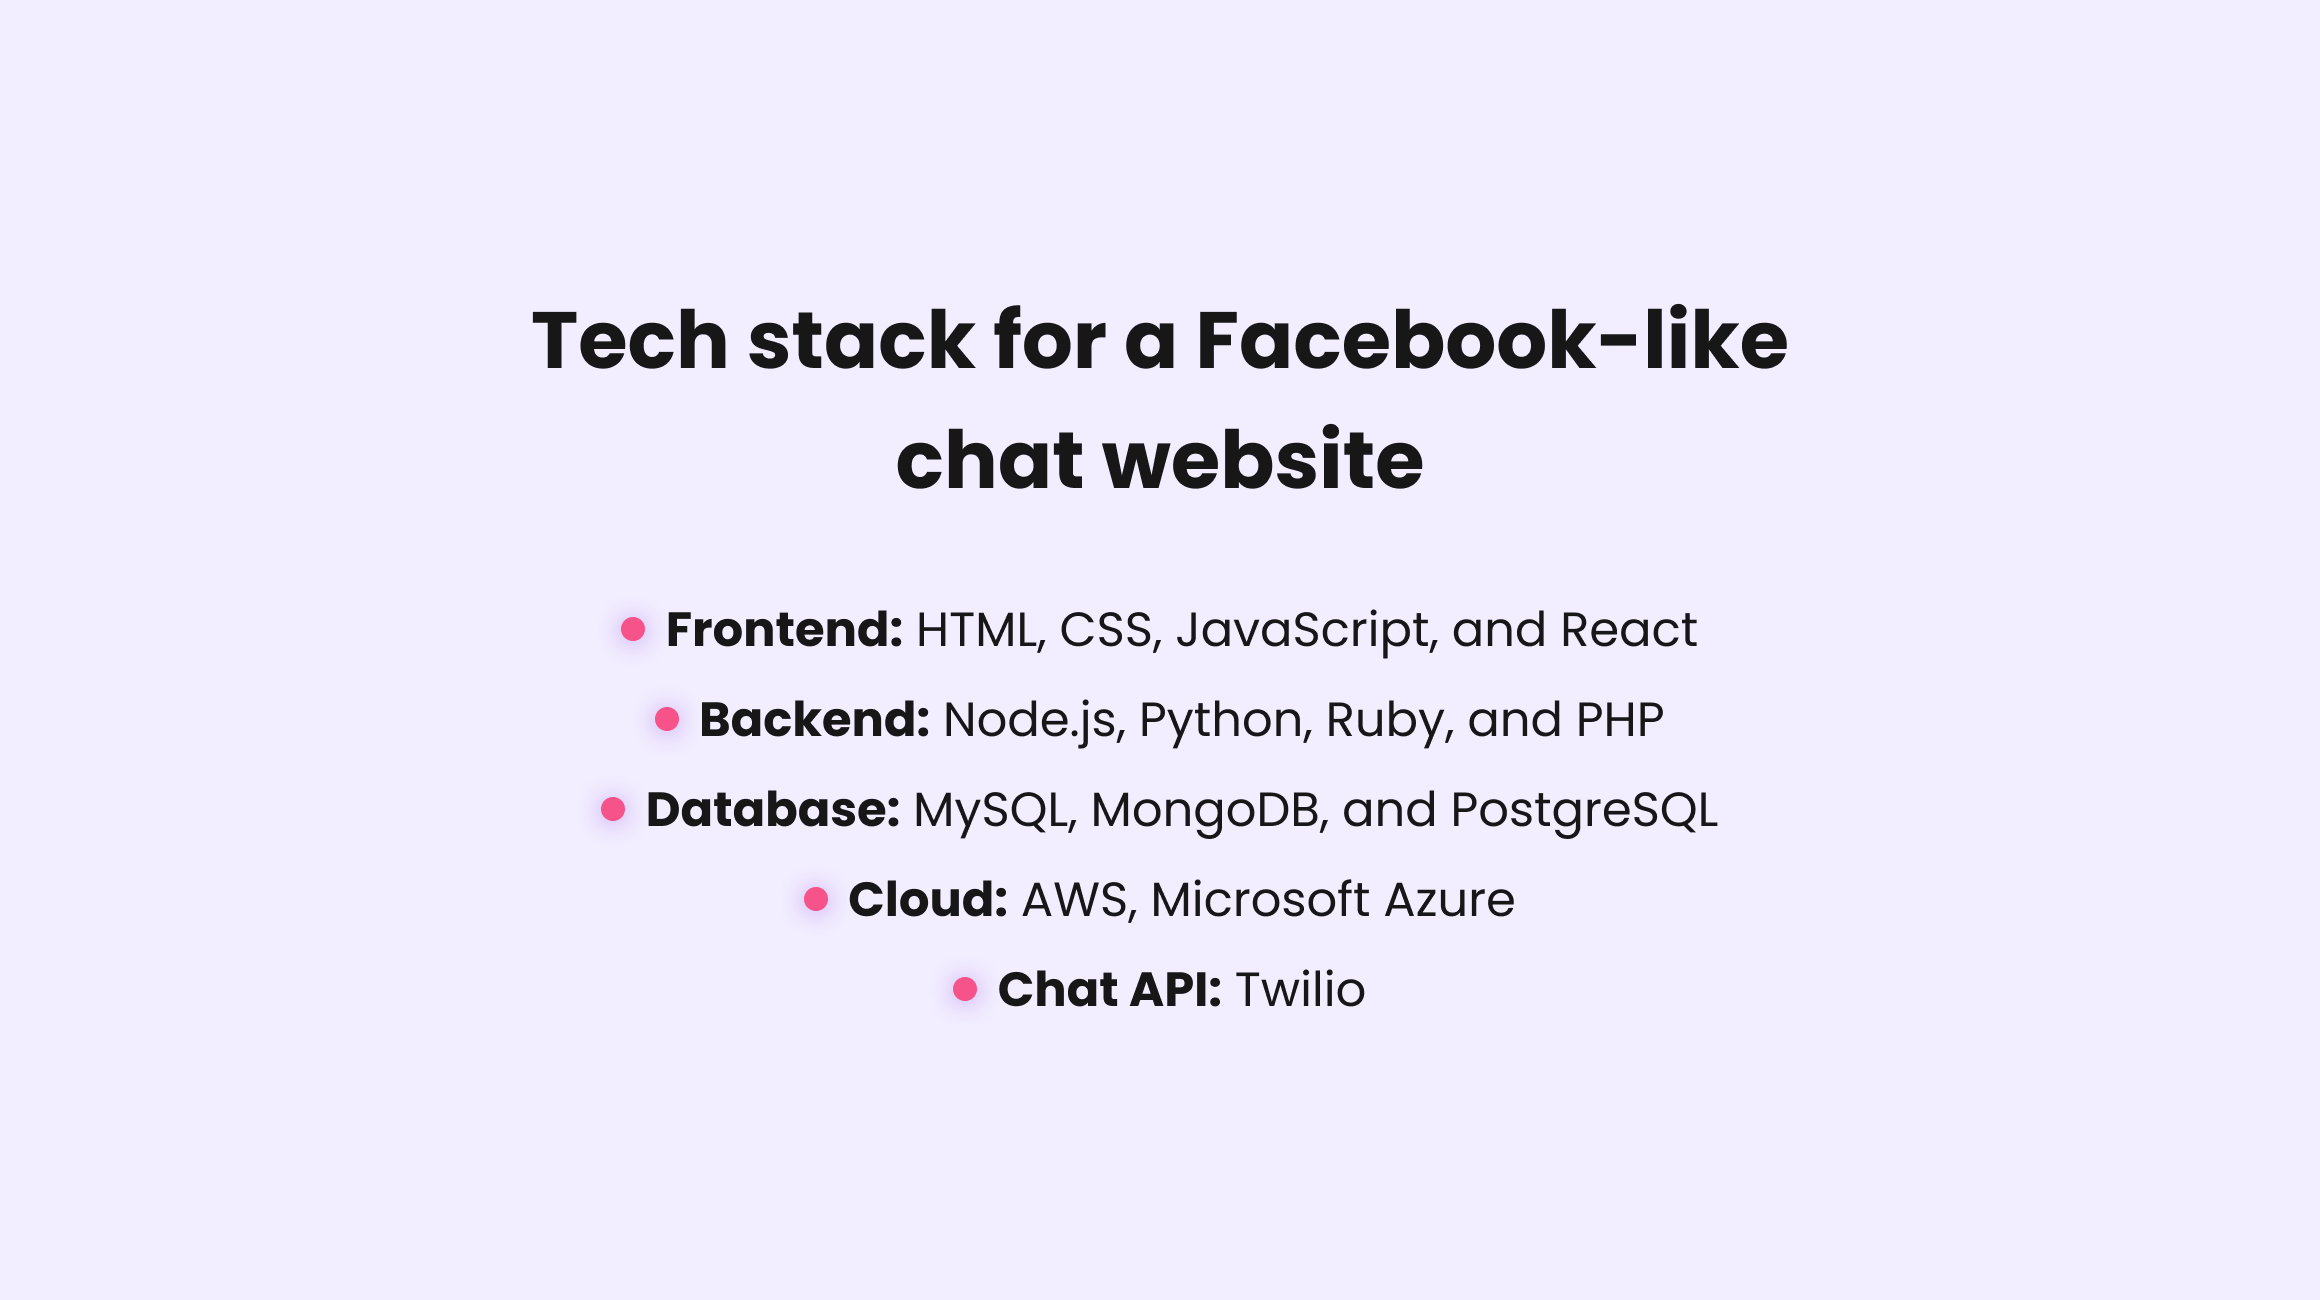 The right technology stack for a Facebook-like website